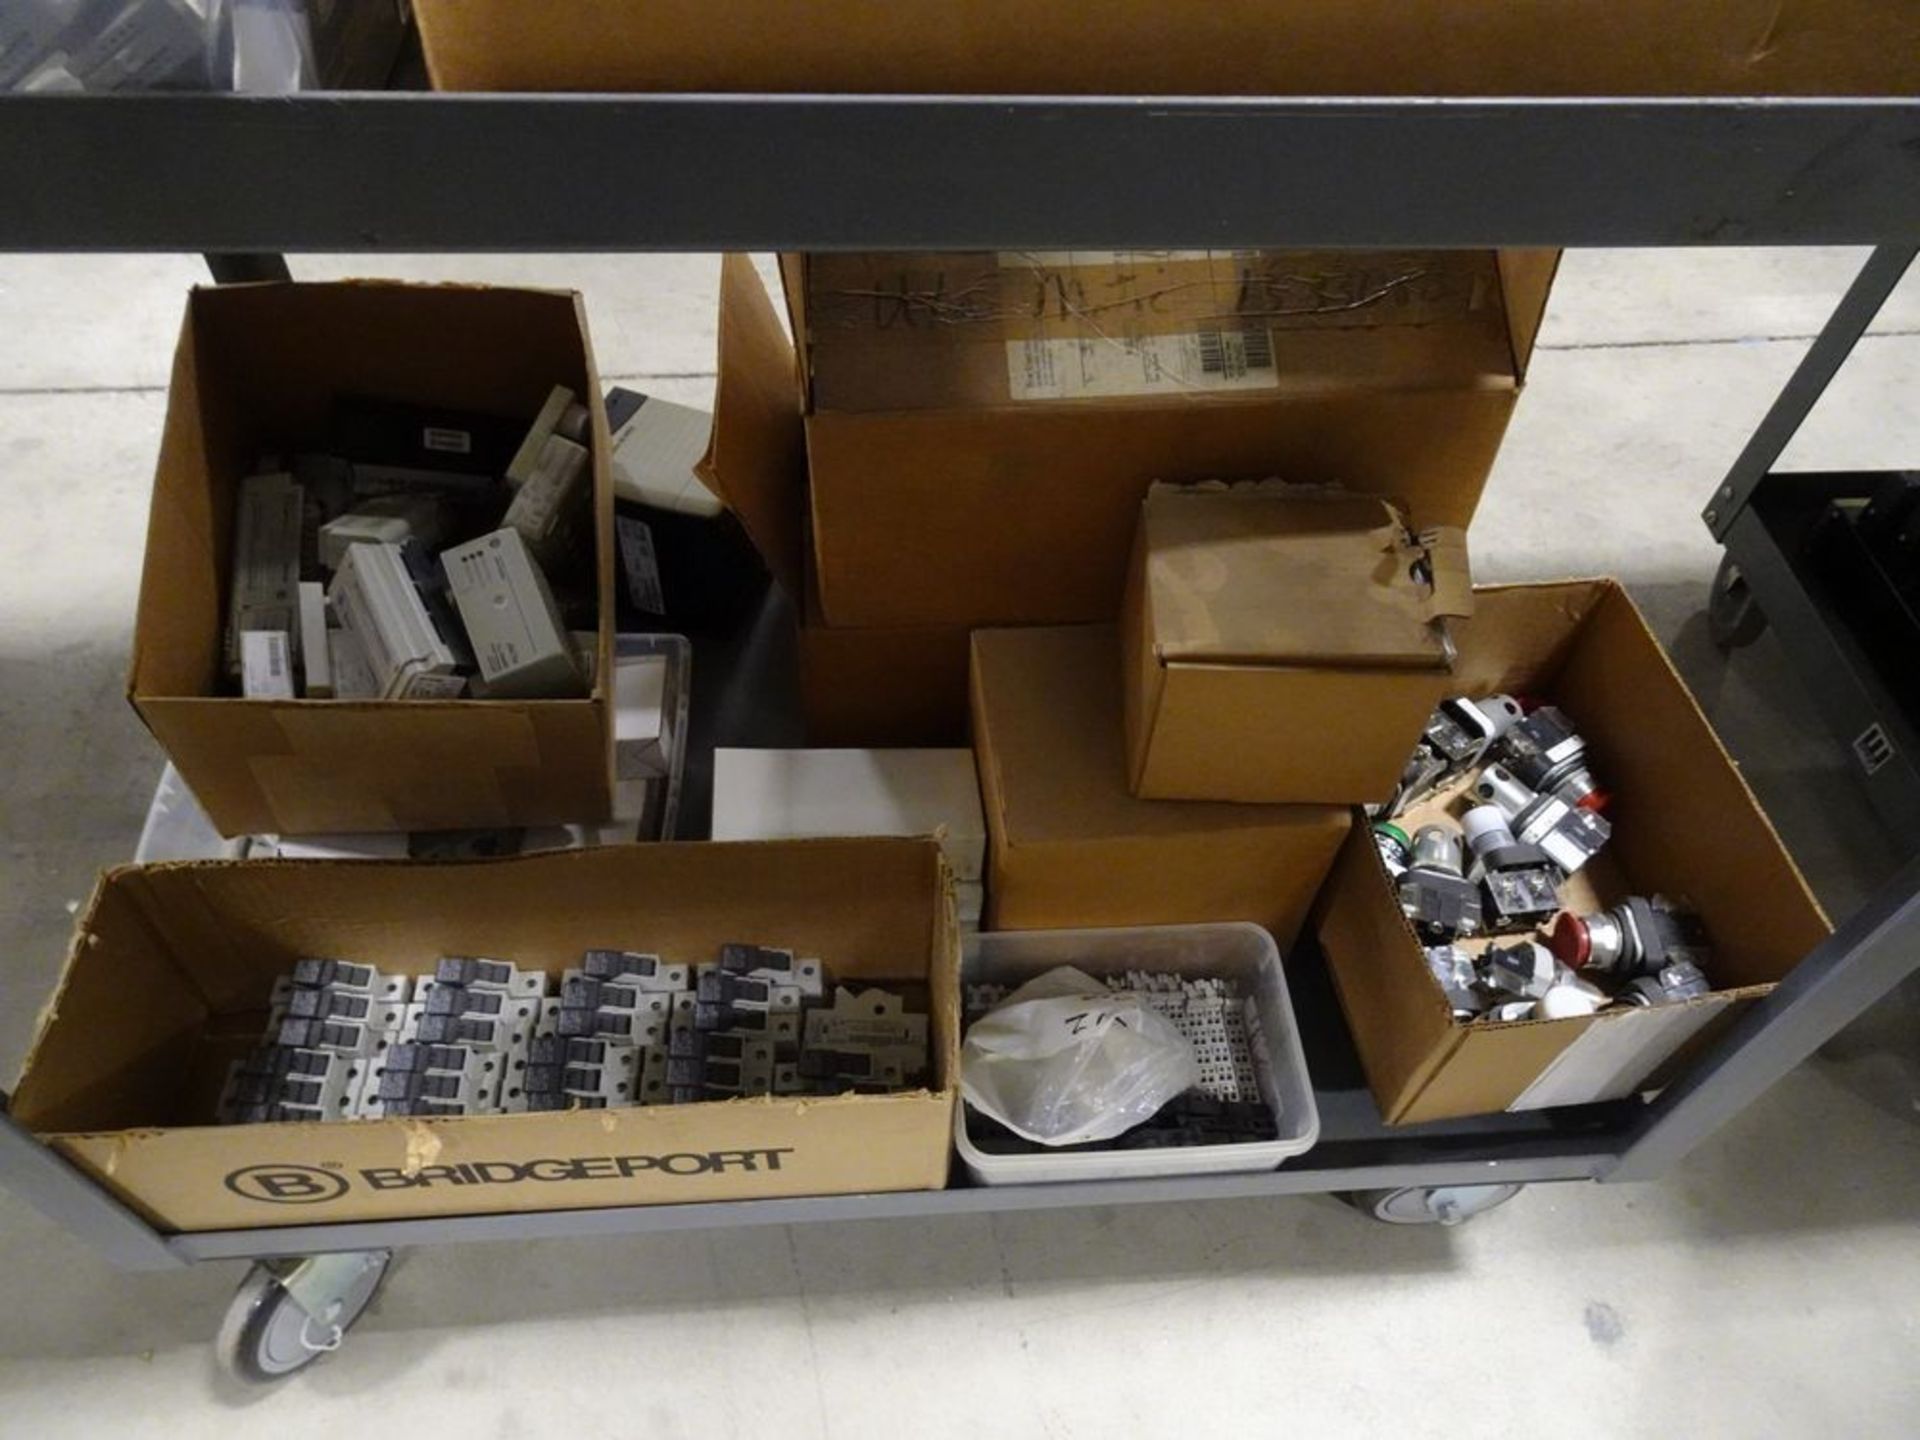 ASSORTED PRODUCT, SWITCHES, RELAYS, VALVES, ETC. - Image 3 of 3